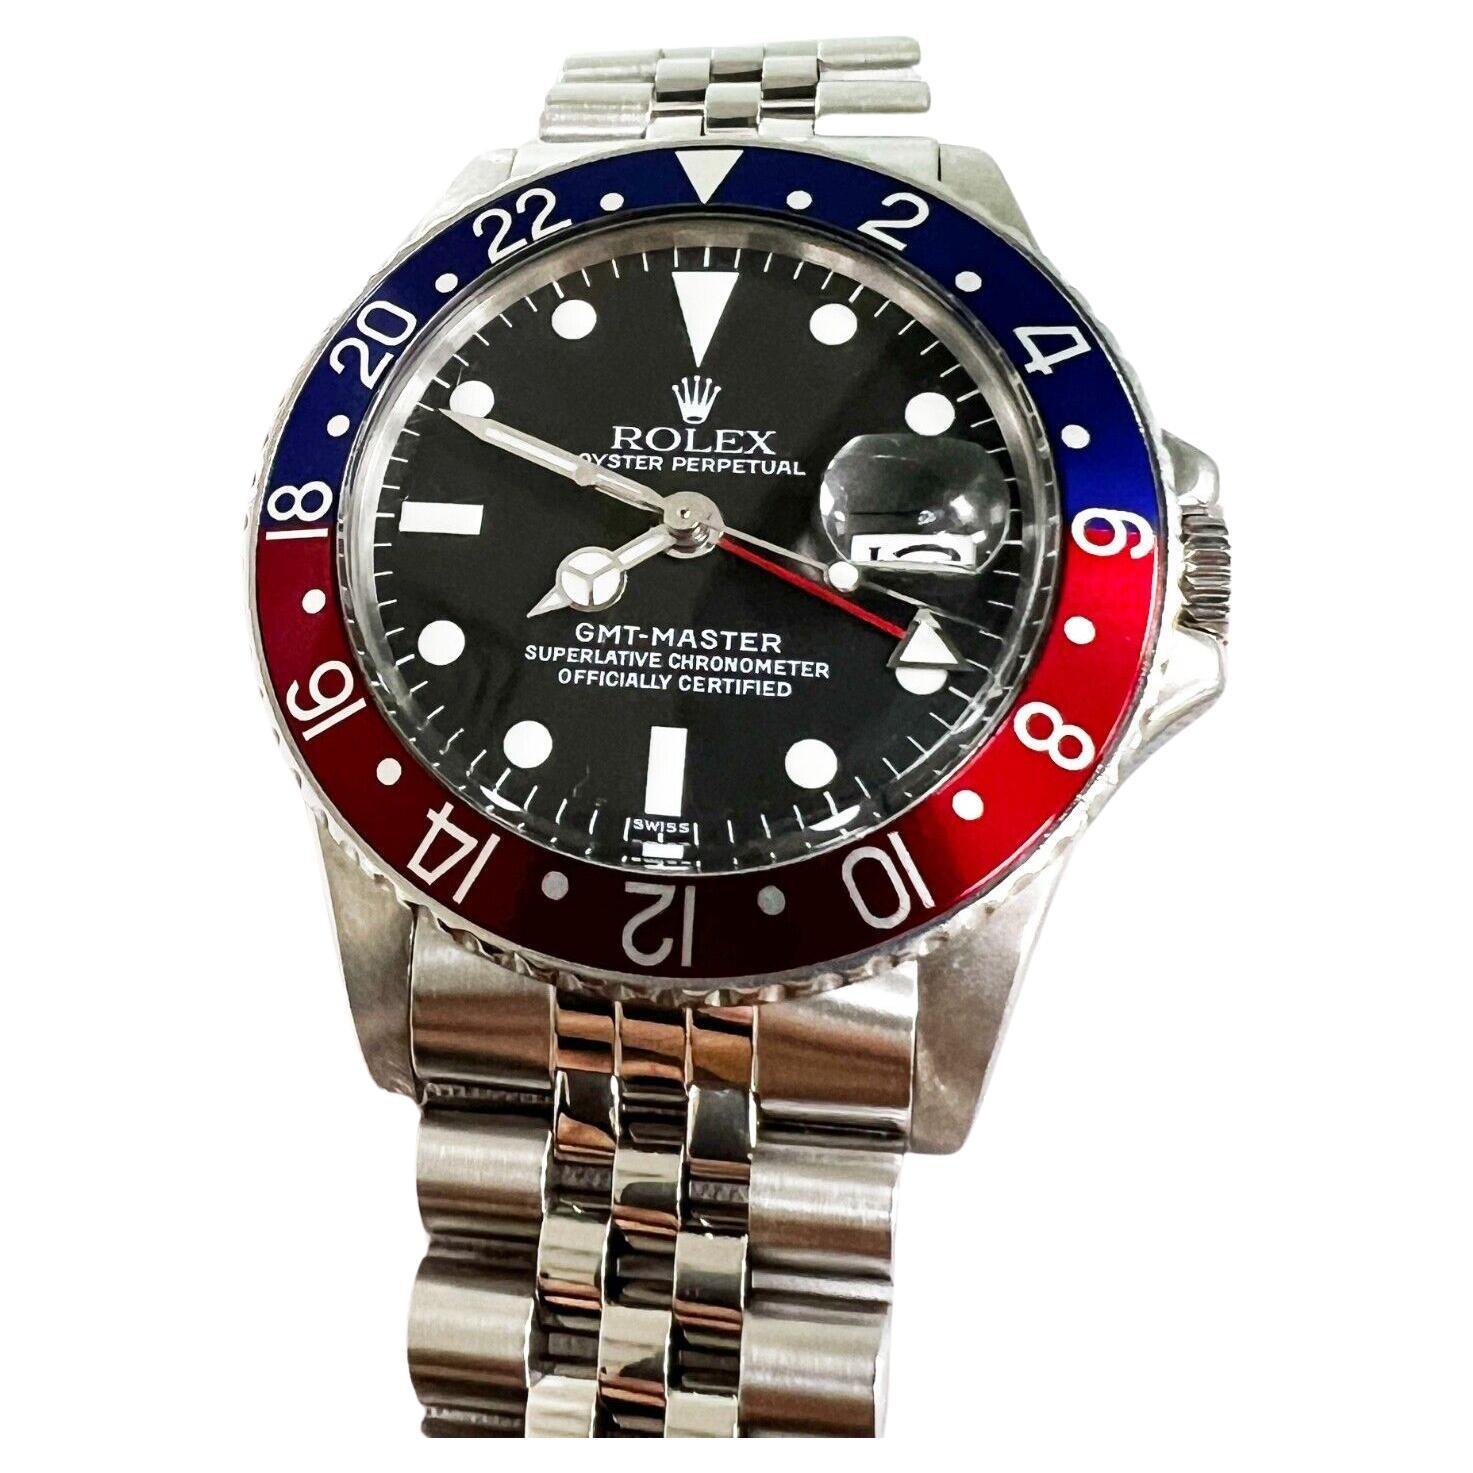 Vintage Rolex 1675 GMT Master Pepsi Red and Blue Stainless Jubilee Band MINT